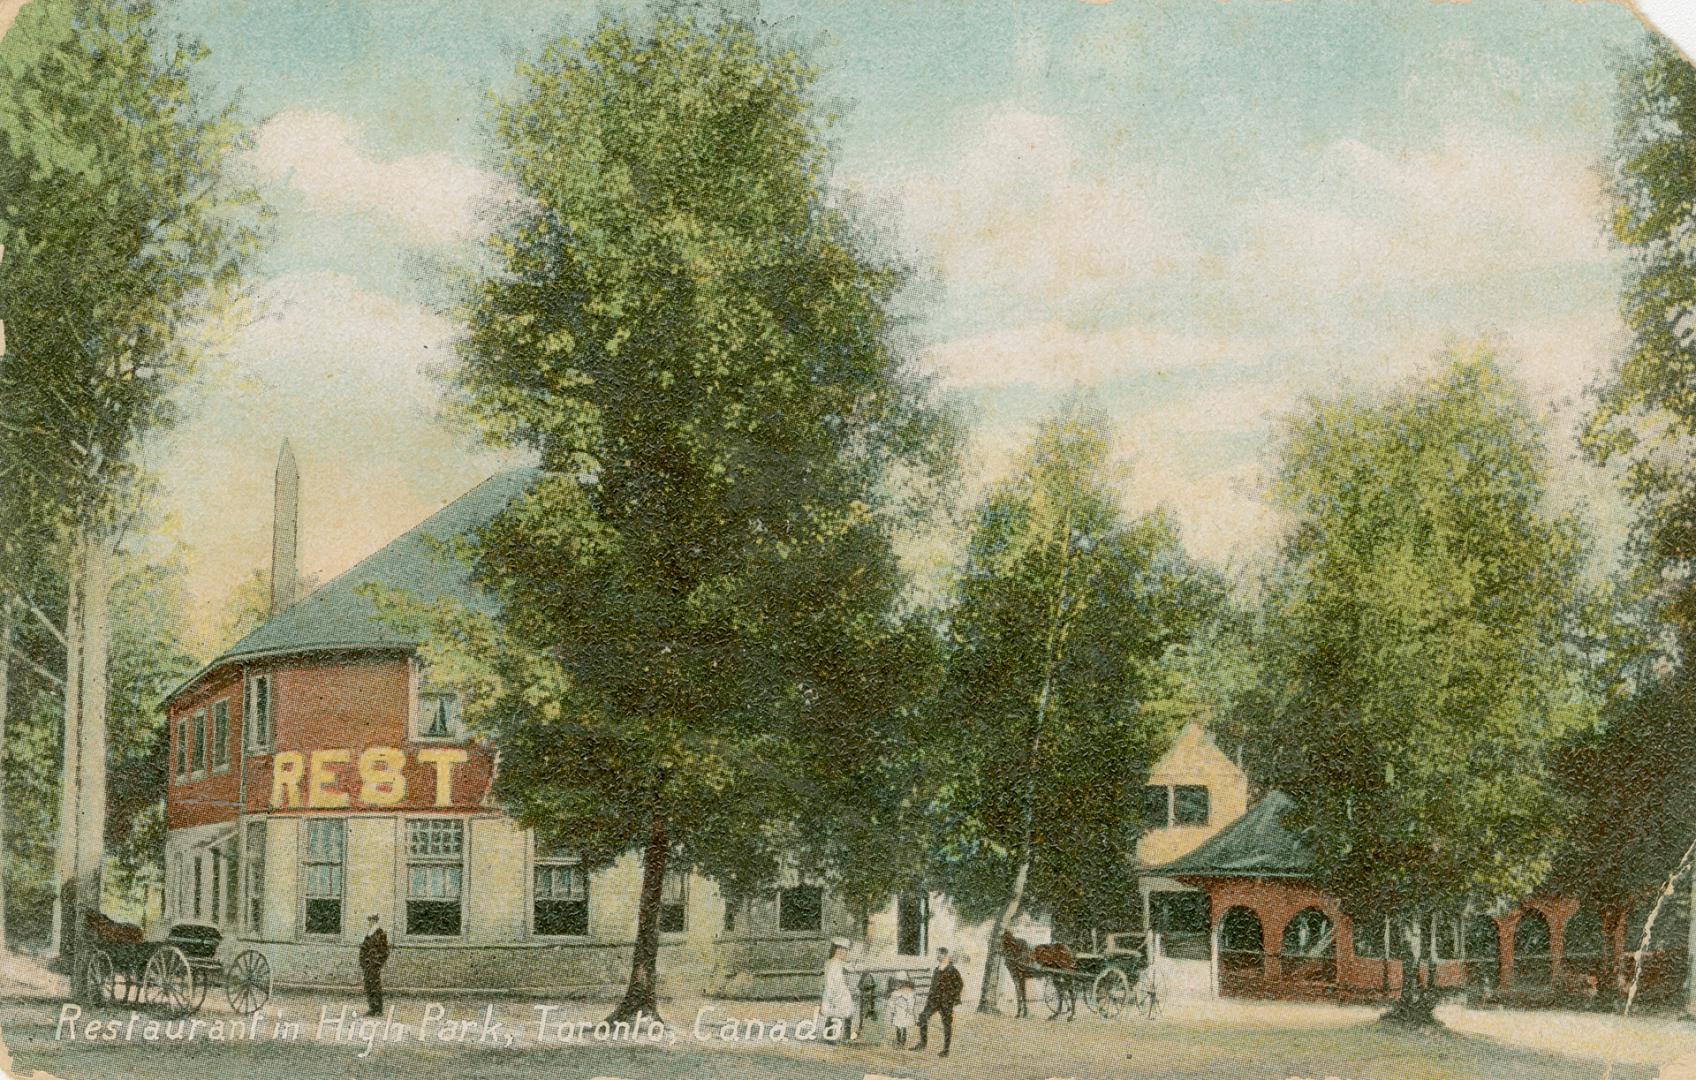 People and horse drawn carriages in front of a two story commercial building in a wooded area.